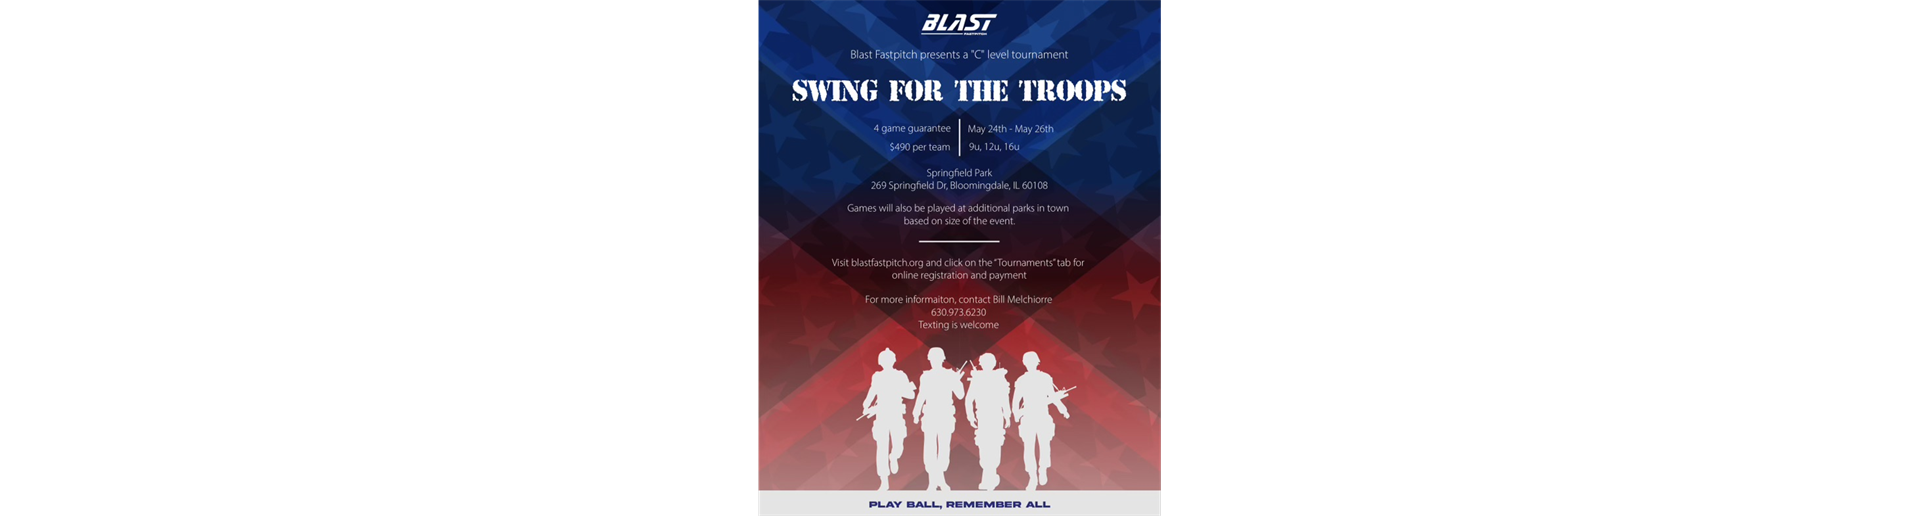 Swing For The Troops Memorial Day Weekend Tournament